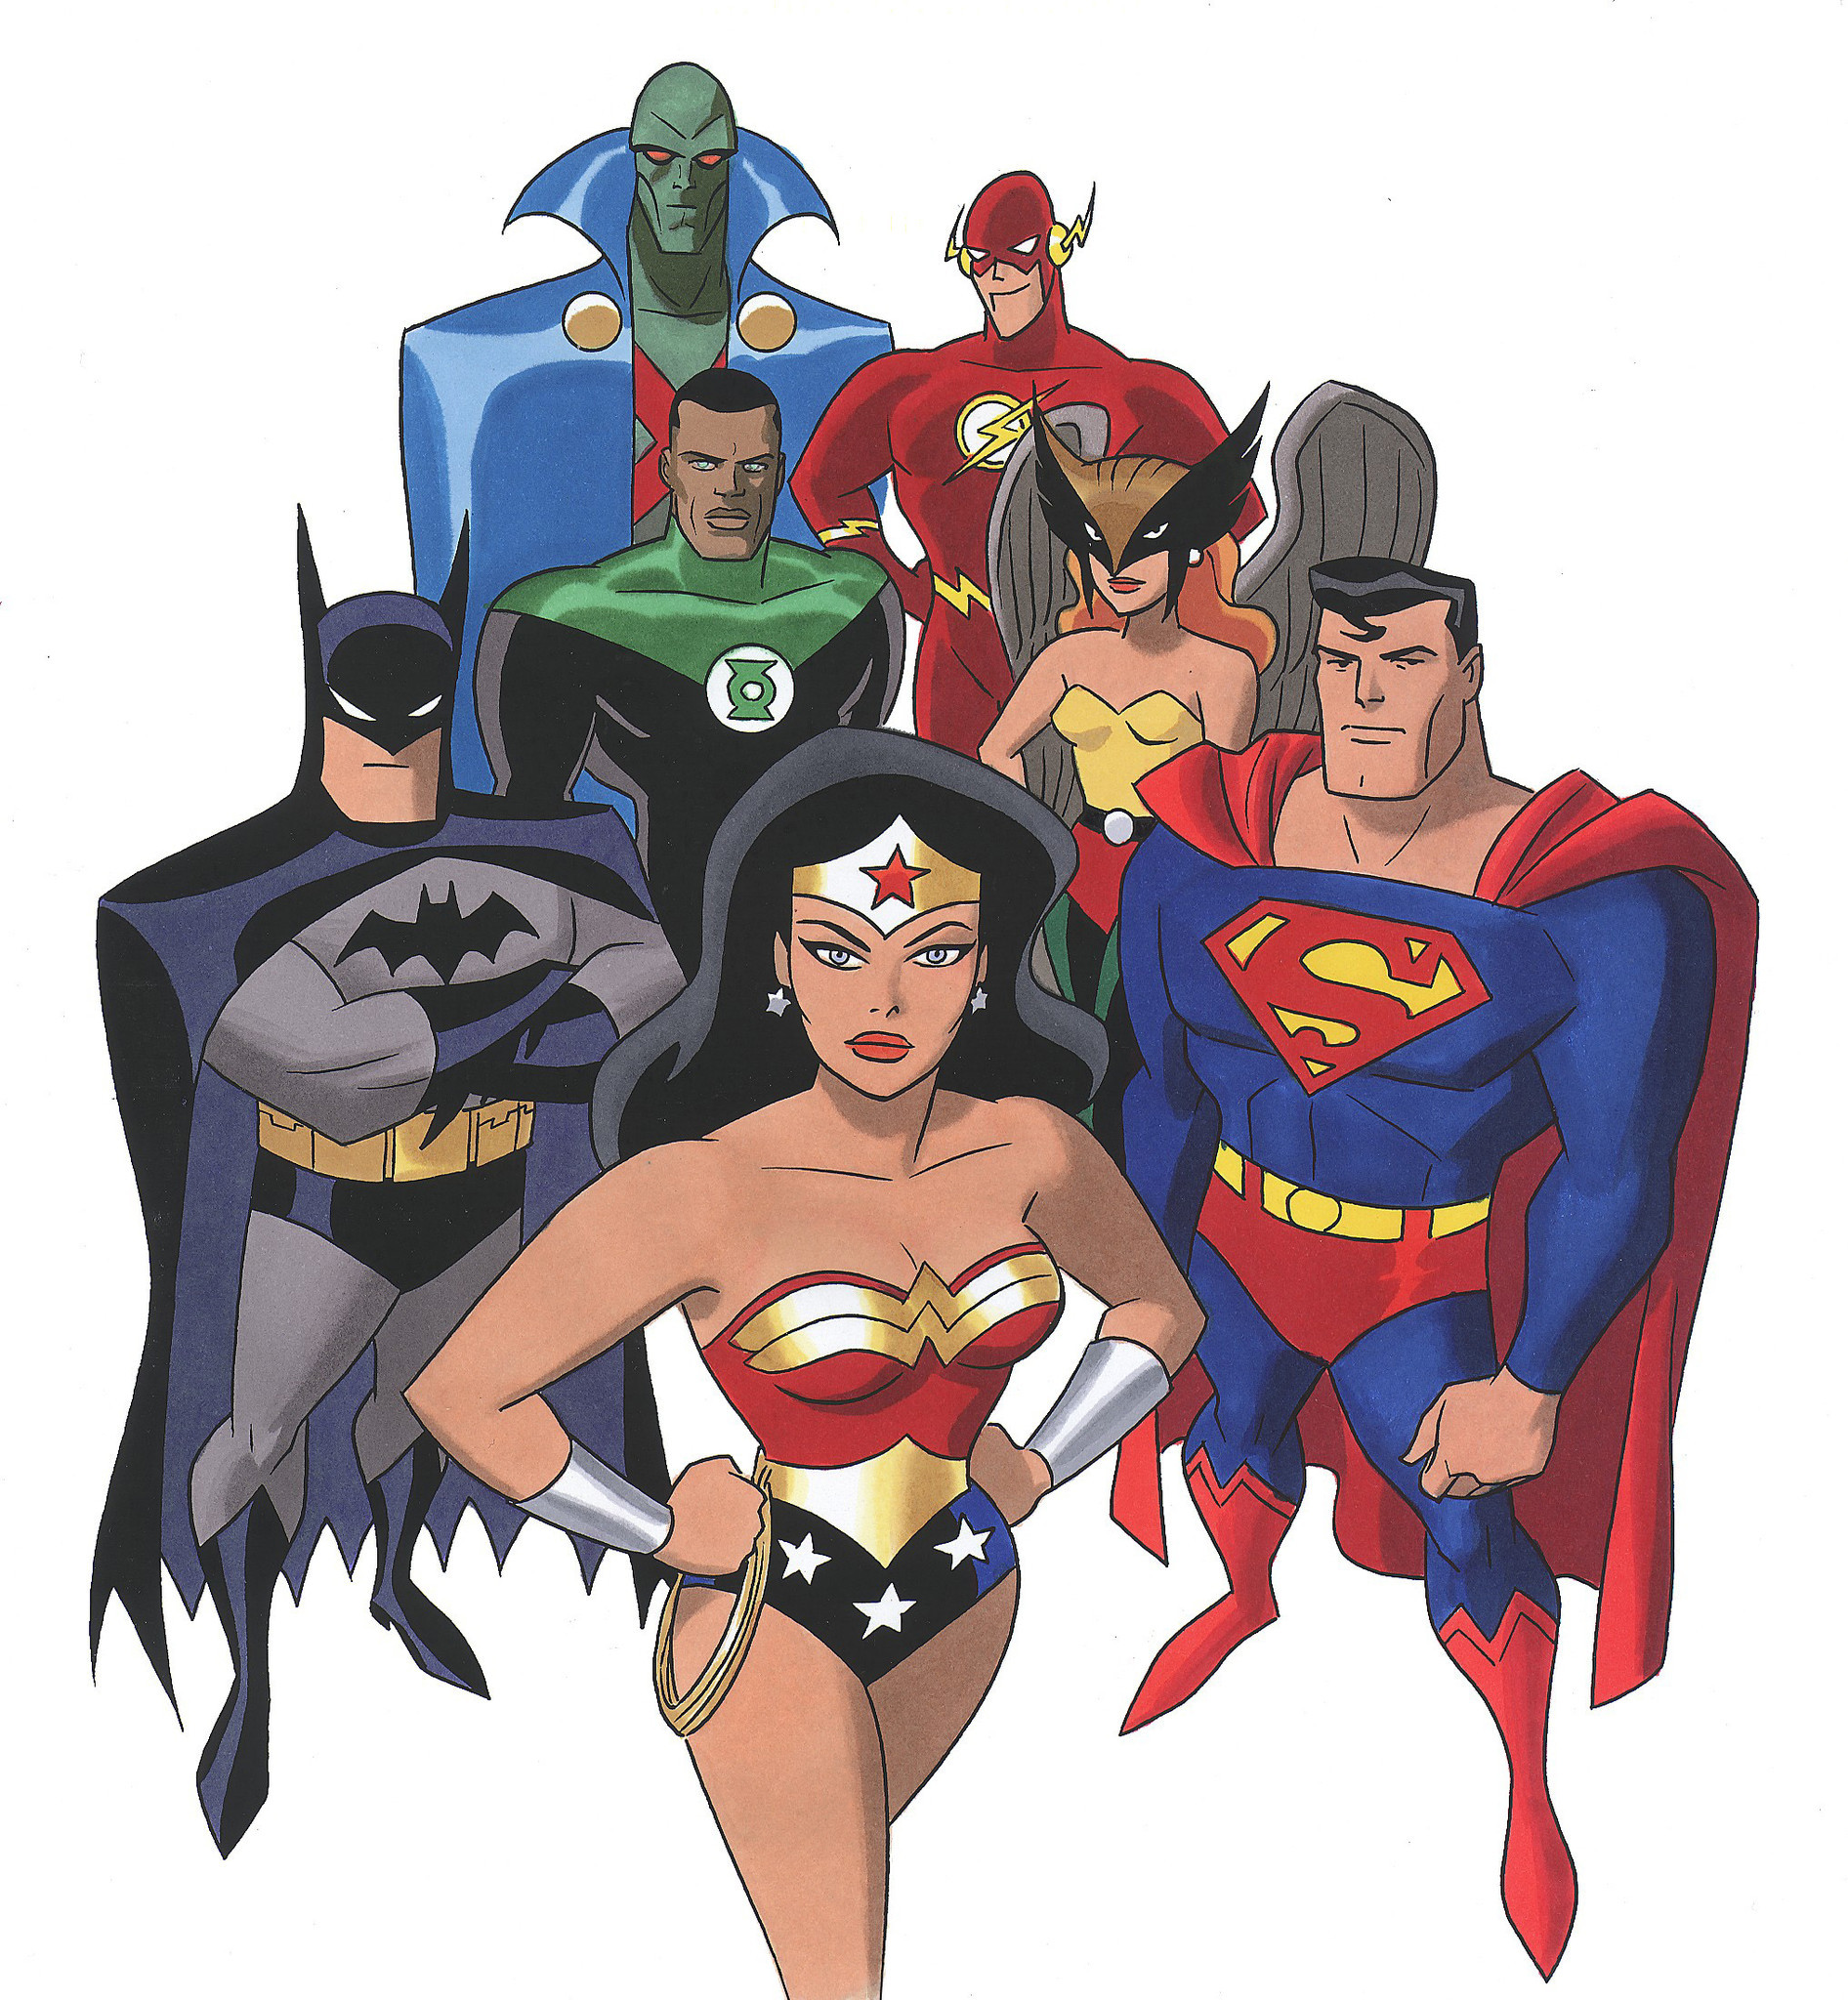 The Justice League.